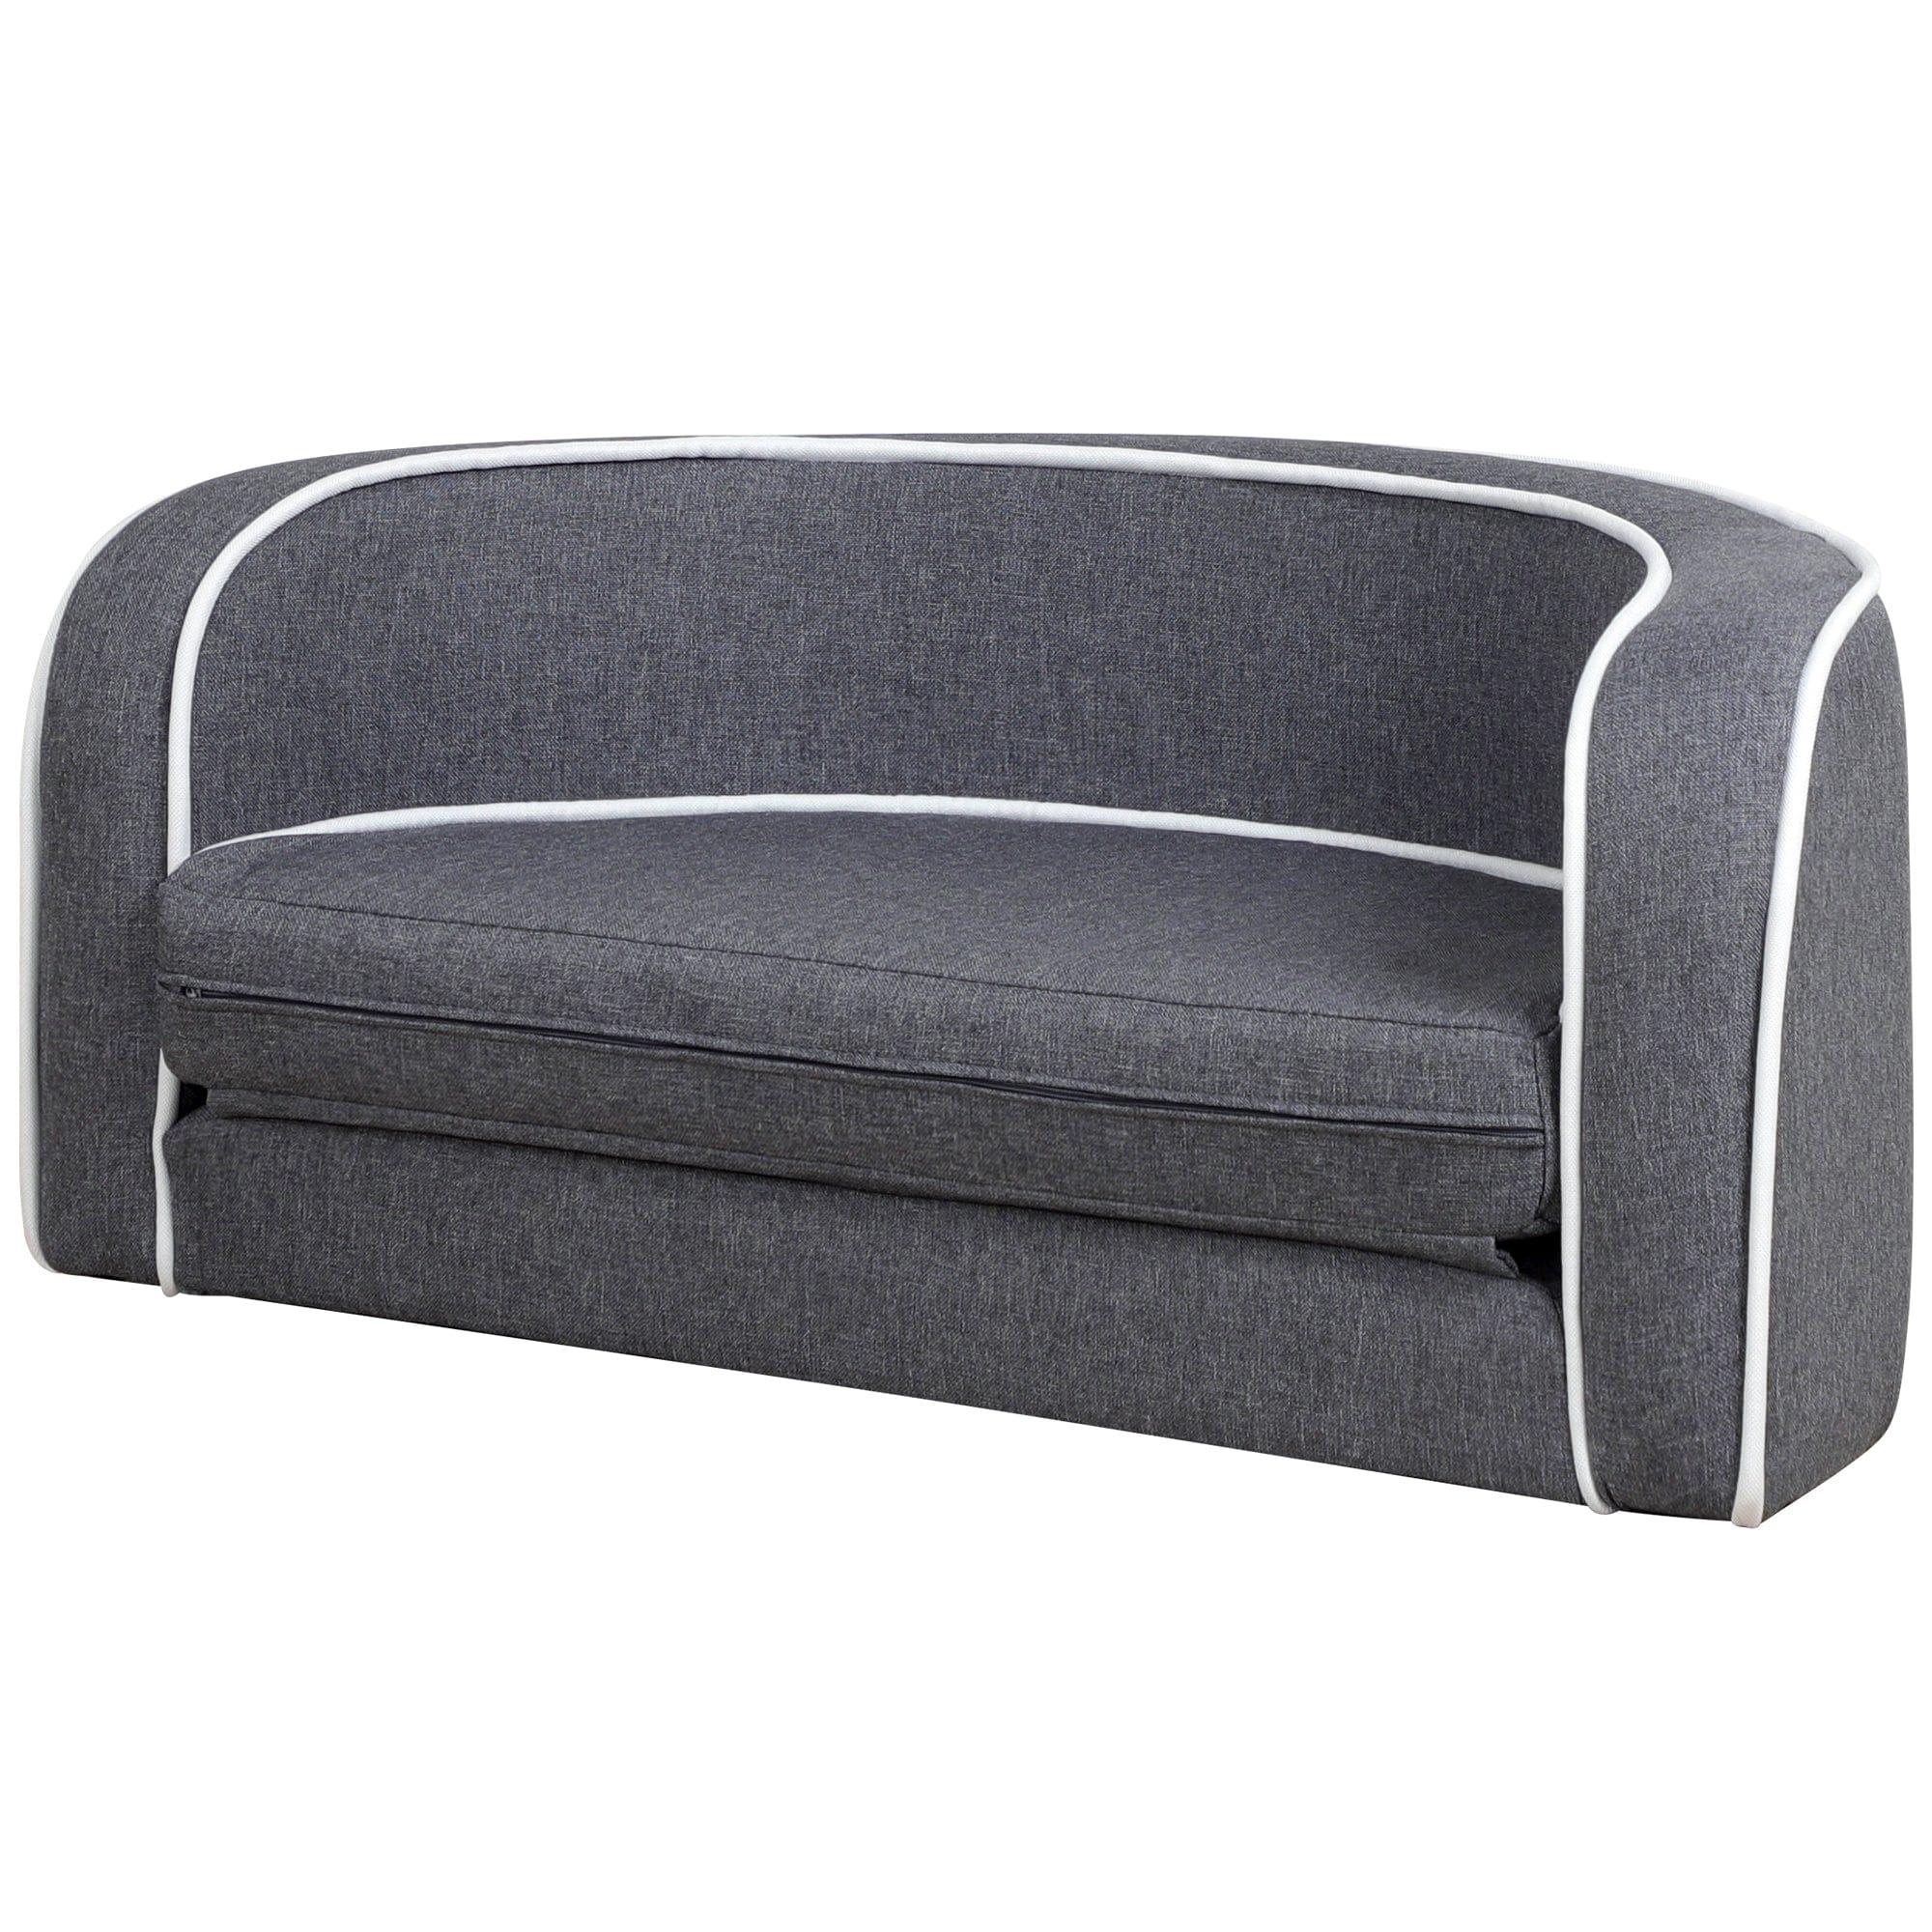 Shop 30" Gray Pet Sofa, Dog sofa, Dog bed, Cat Bed, Cat Sofa, with Wooden Structure and Linen Goods White Roller Lines on the Edges Curved Appearance pet Sofa with Cushion Mademoiselle Home Decor